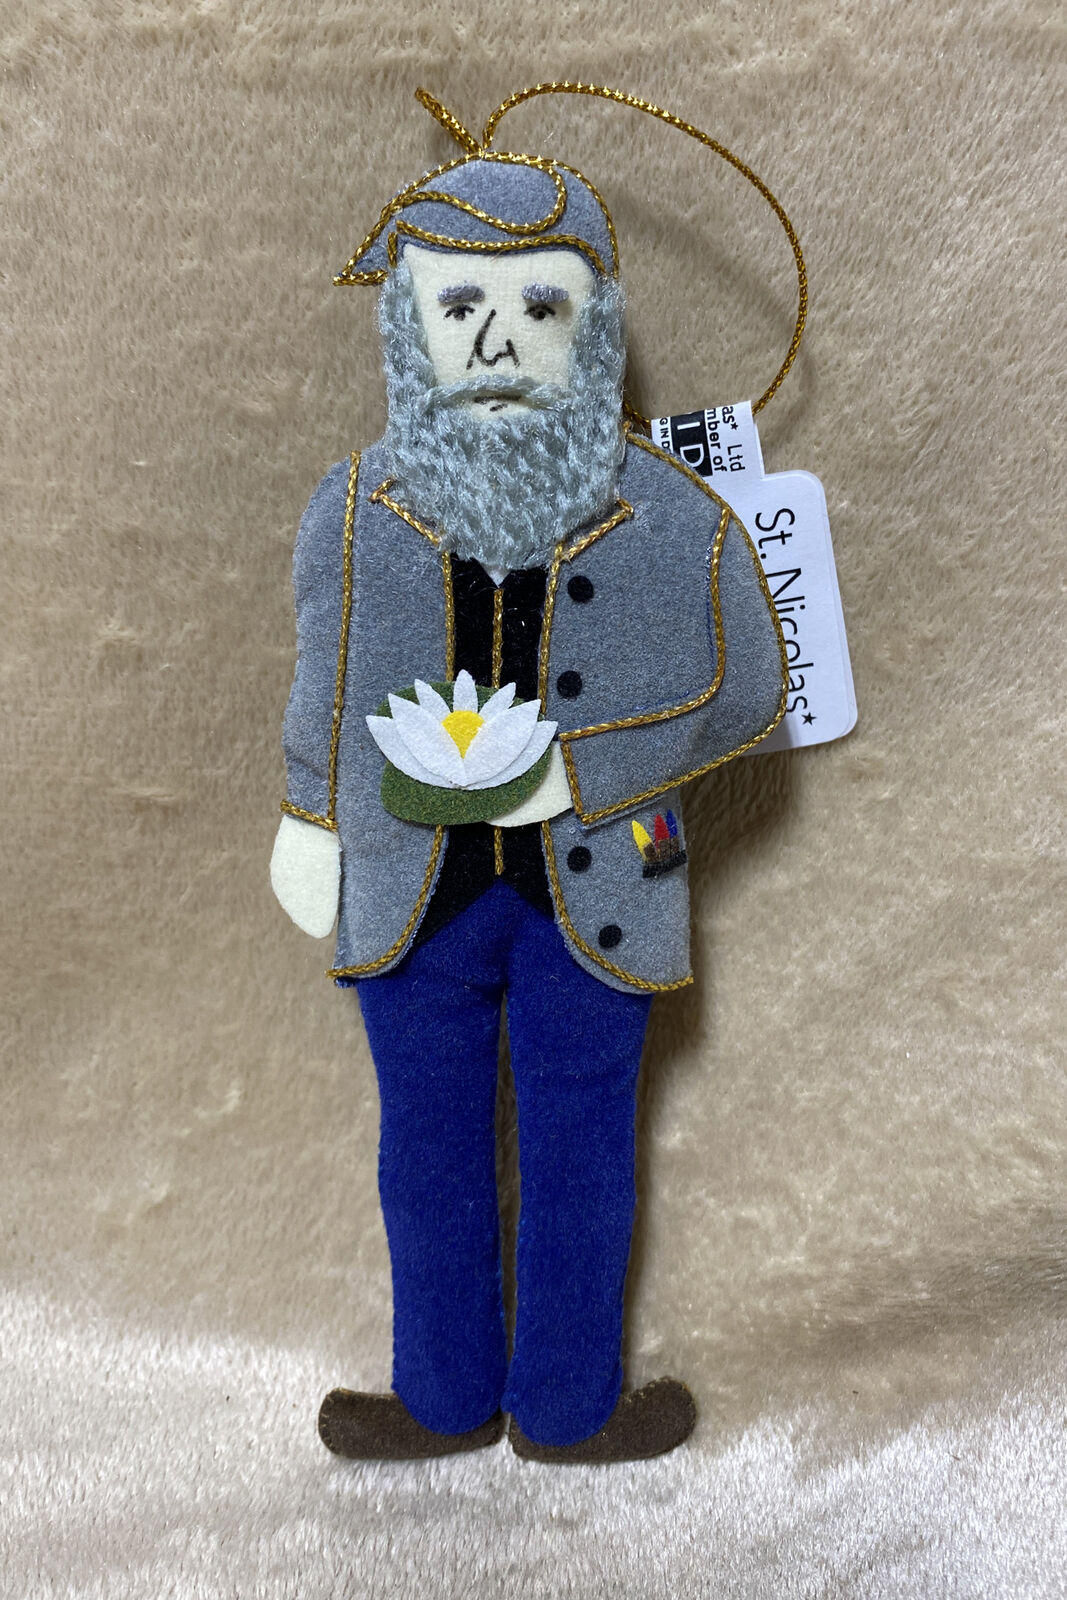 St. Nicolas Embroidered  Monet Ornament 6.5 Inches Tall #9088 MN NEW